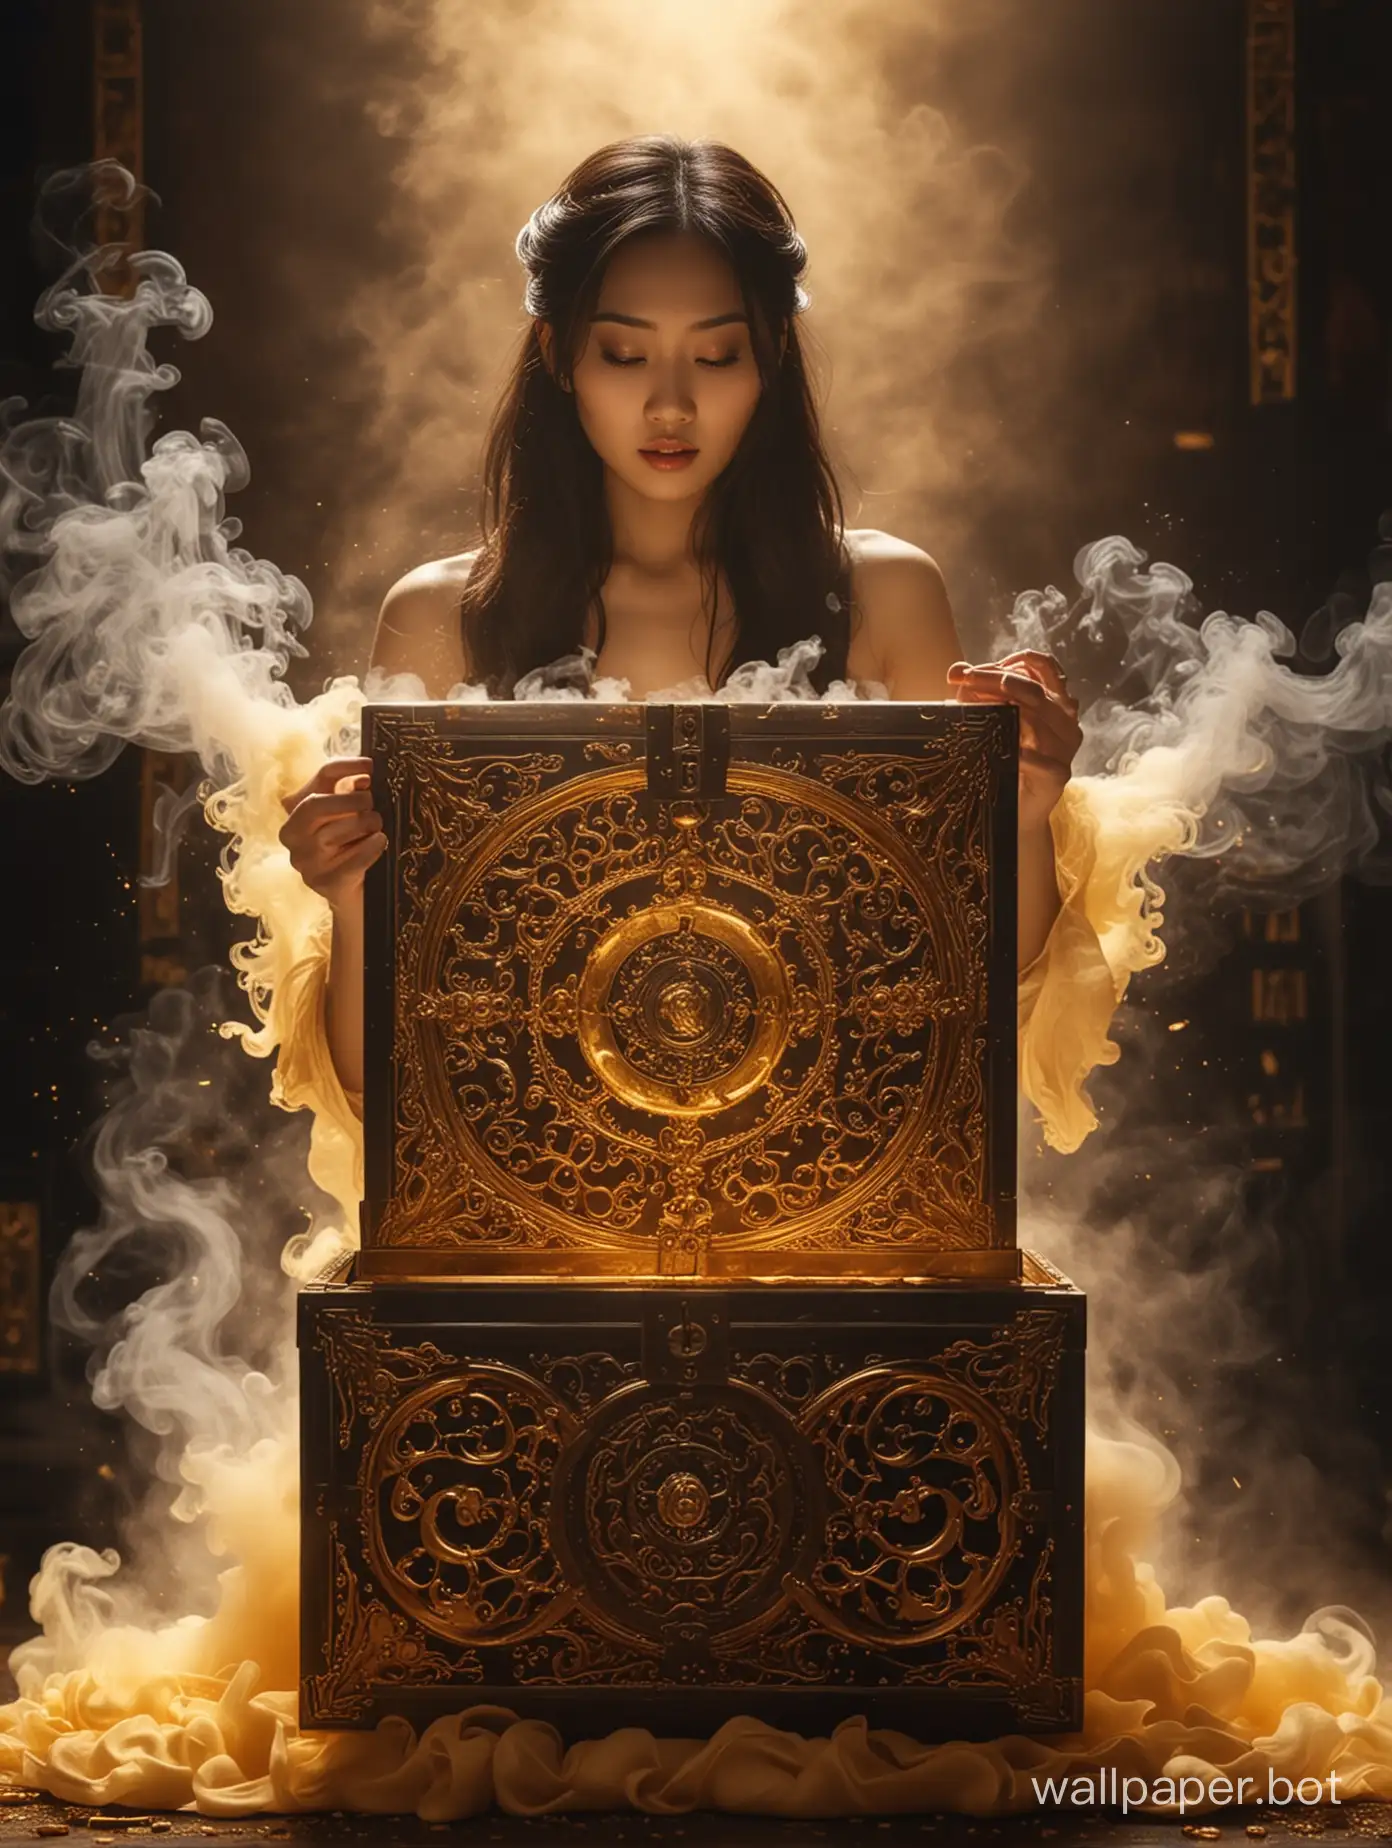 a scene of 25 year old asian female opening an ornate golden pandora's box  with all forms of evil flowing out of the box in amazing shades and shapes of smoke, cinematic, be creative and unbounded by reality, use fantastic colors